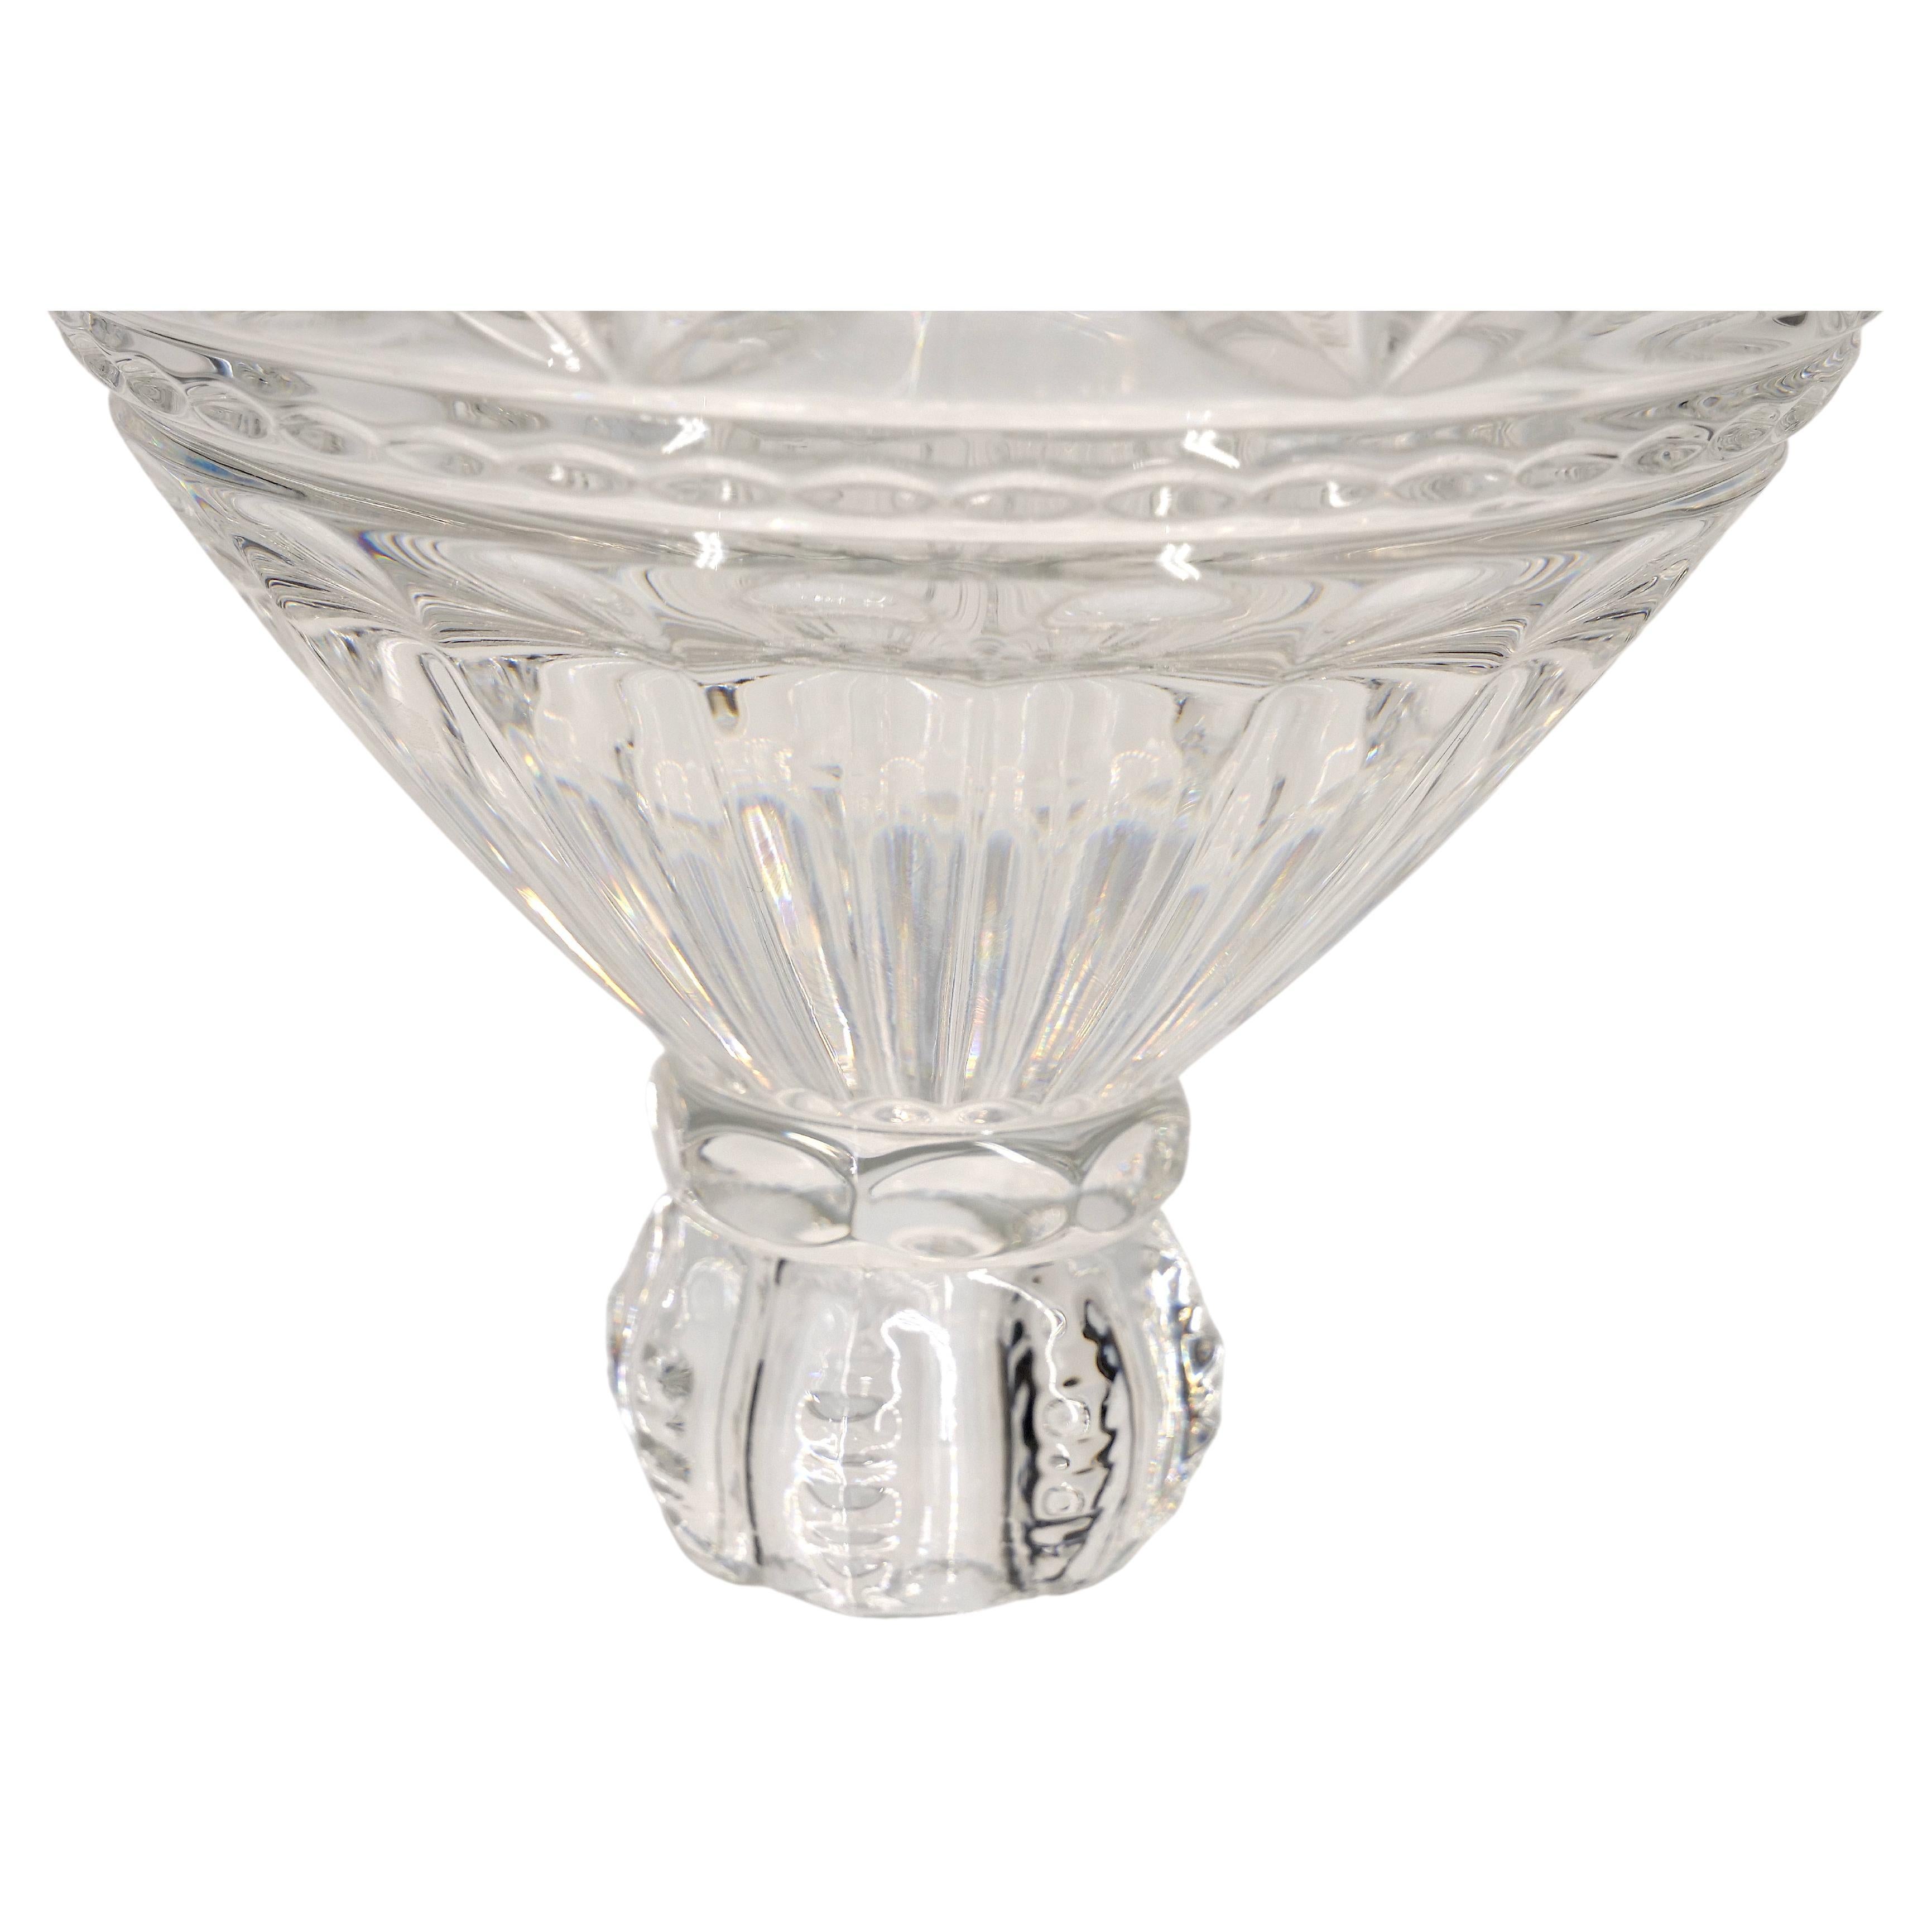 French Cut Crystal Tall Covered Decorative Piece / Urn For Sale 3